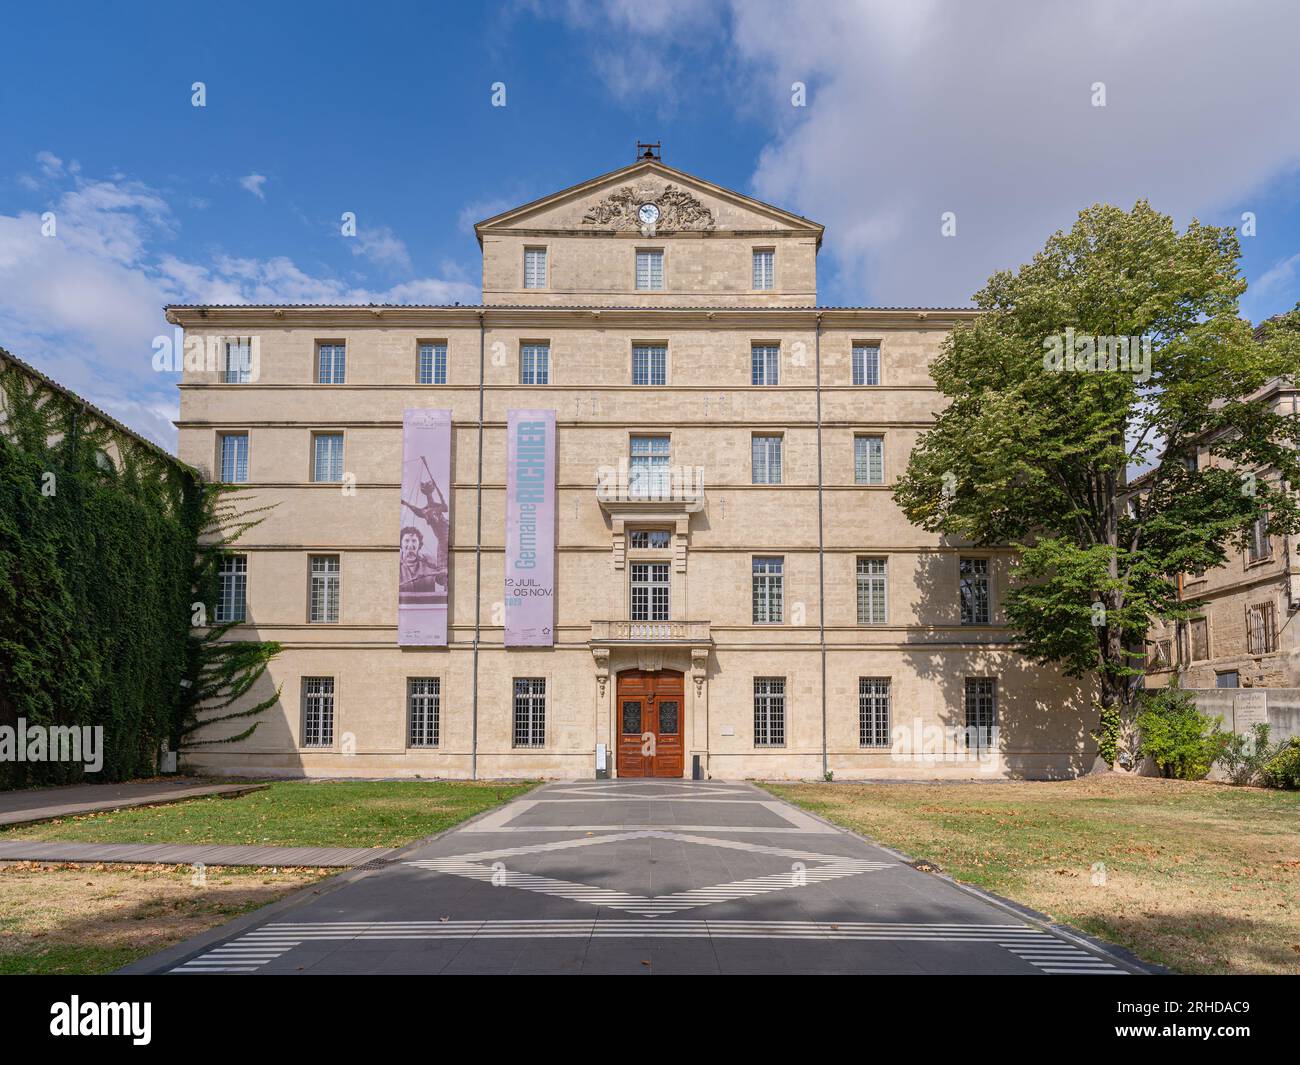 View of ancient classical stone facade and entrance of historic Hotel de Massilian, home to the Musee Fabre, a famous landmark of Montpellier, France Stock Photo